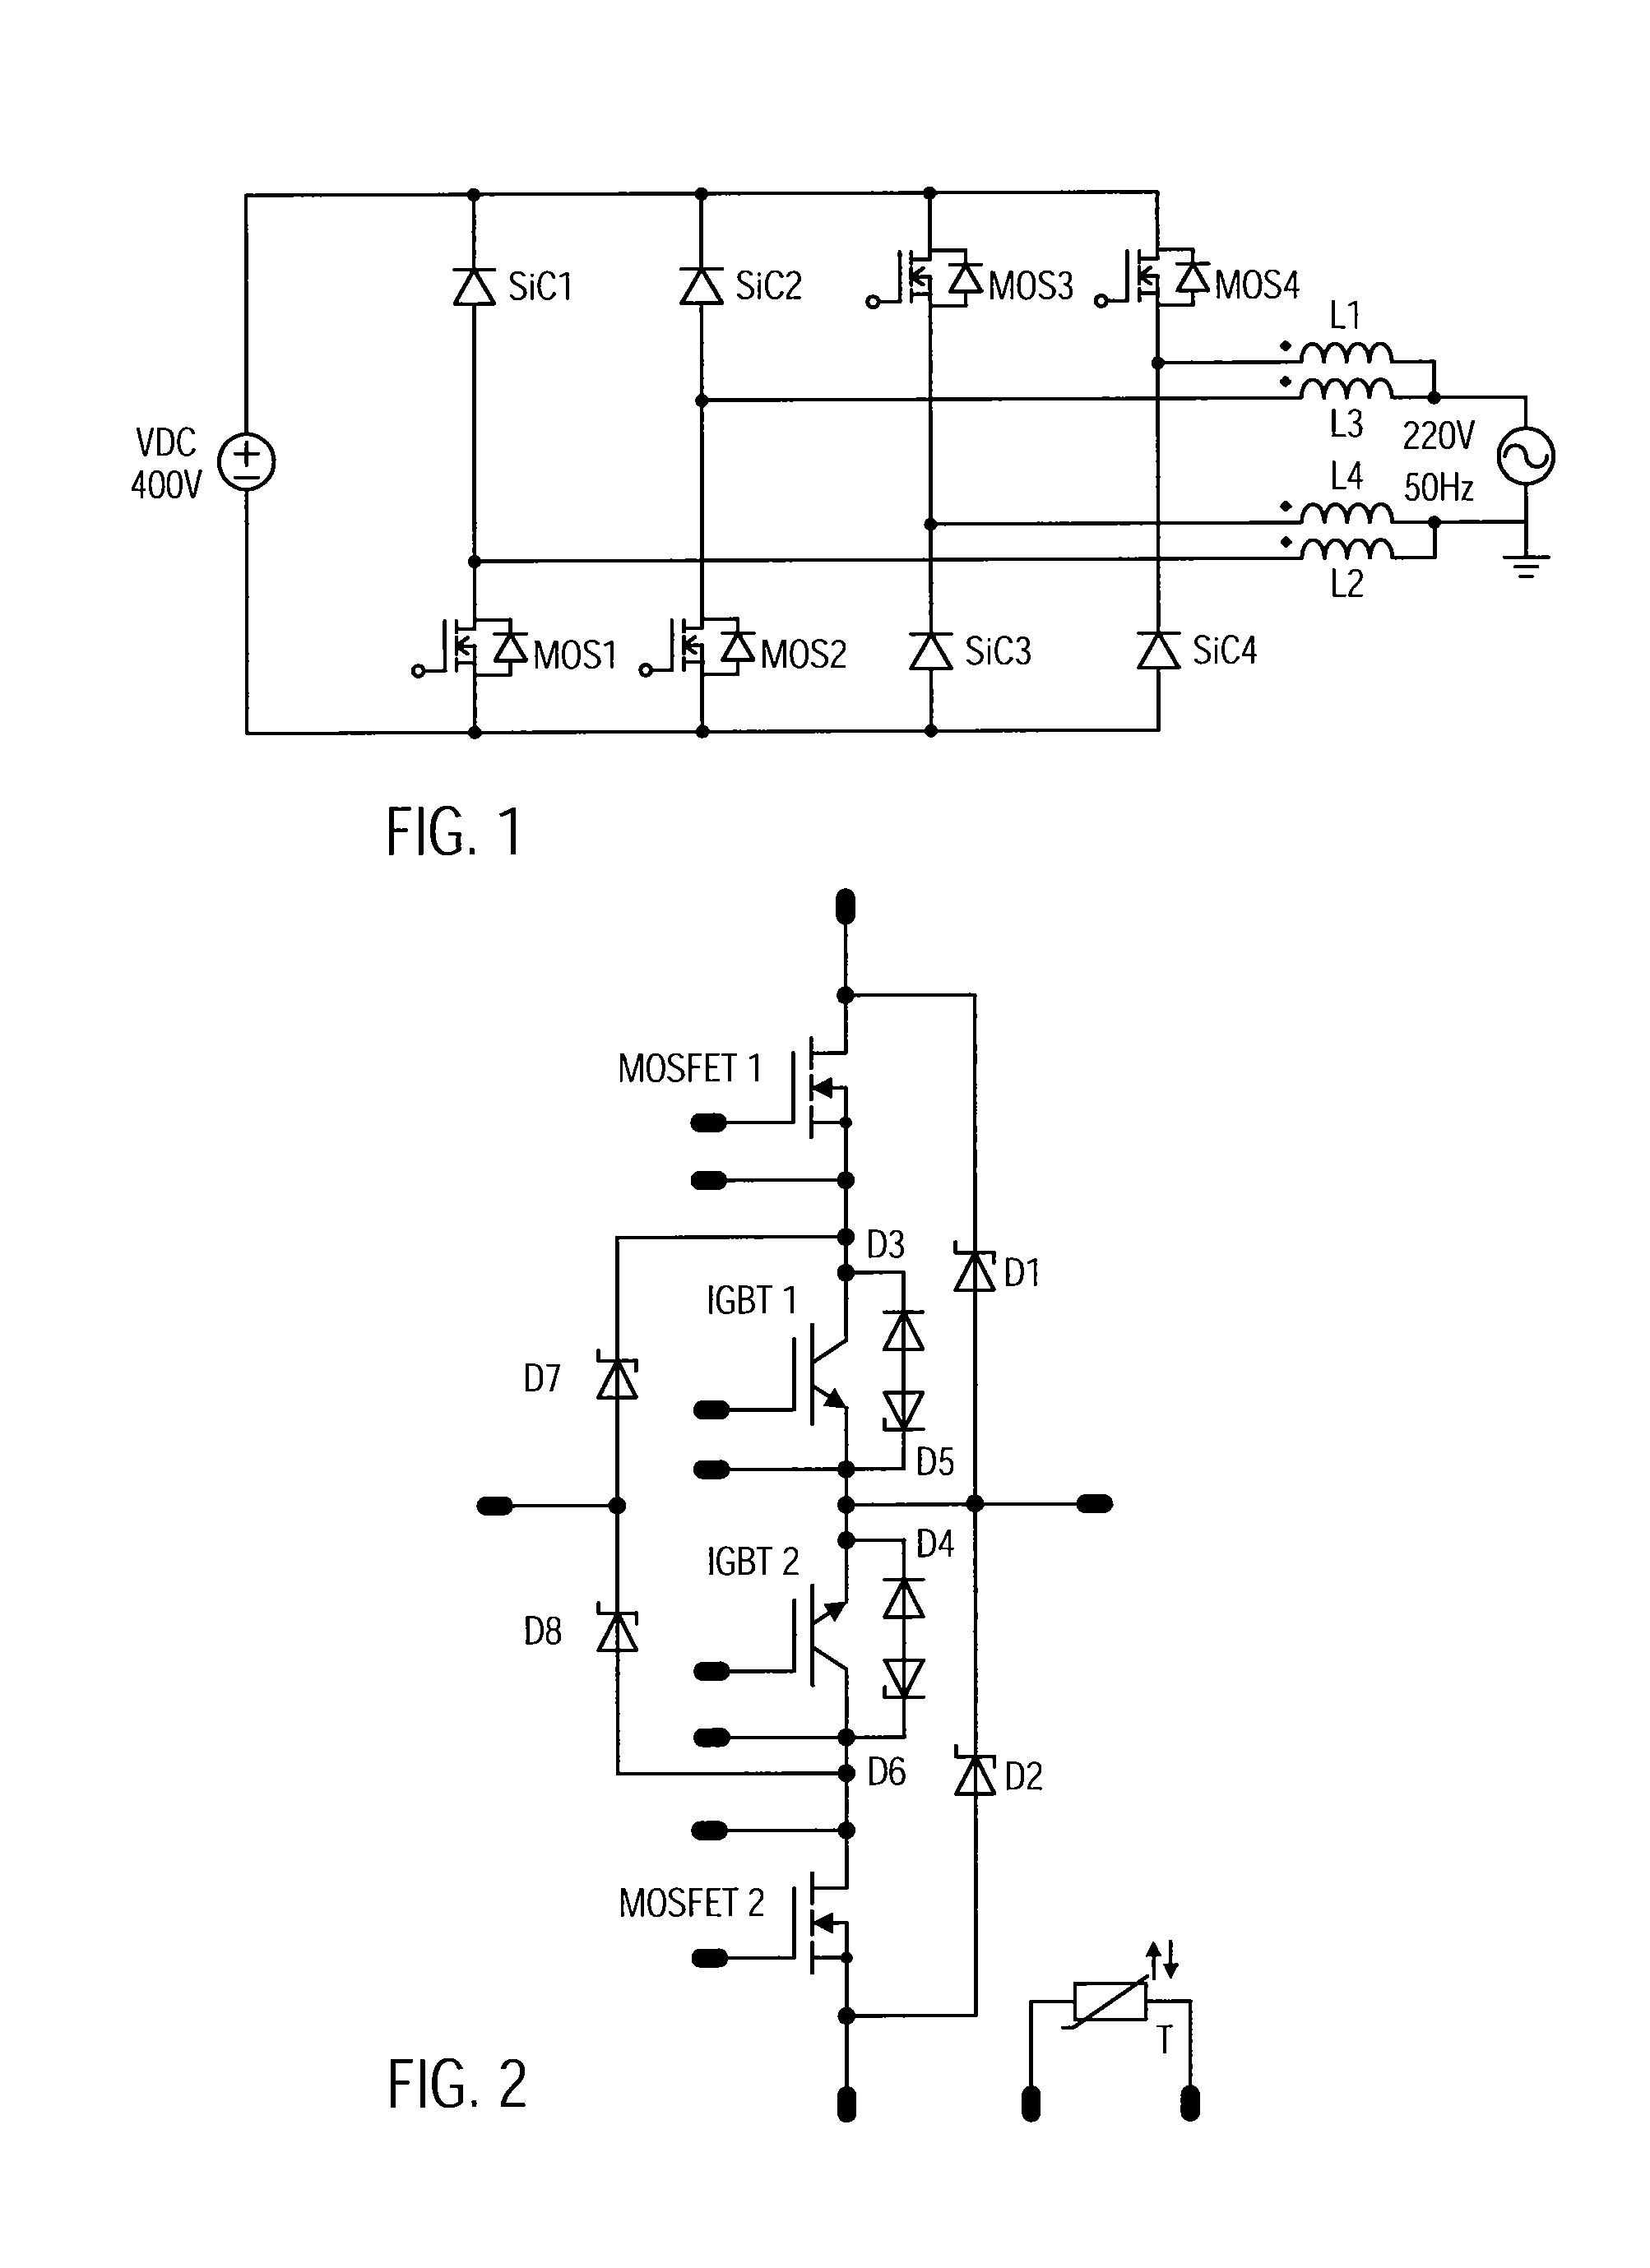 Inverter topologies usable with reactive power